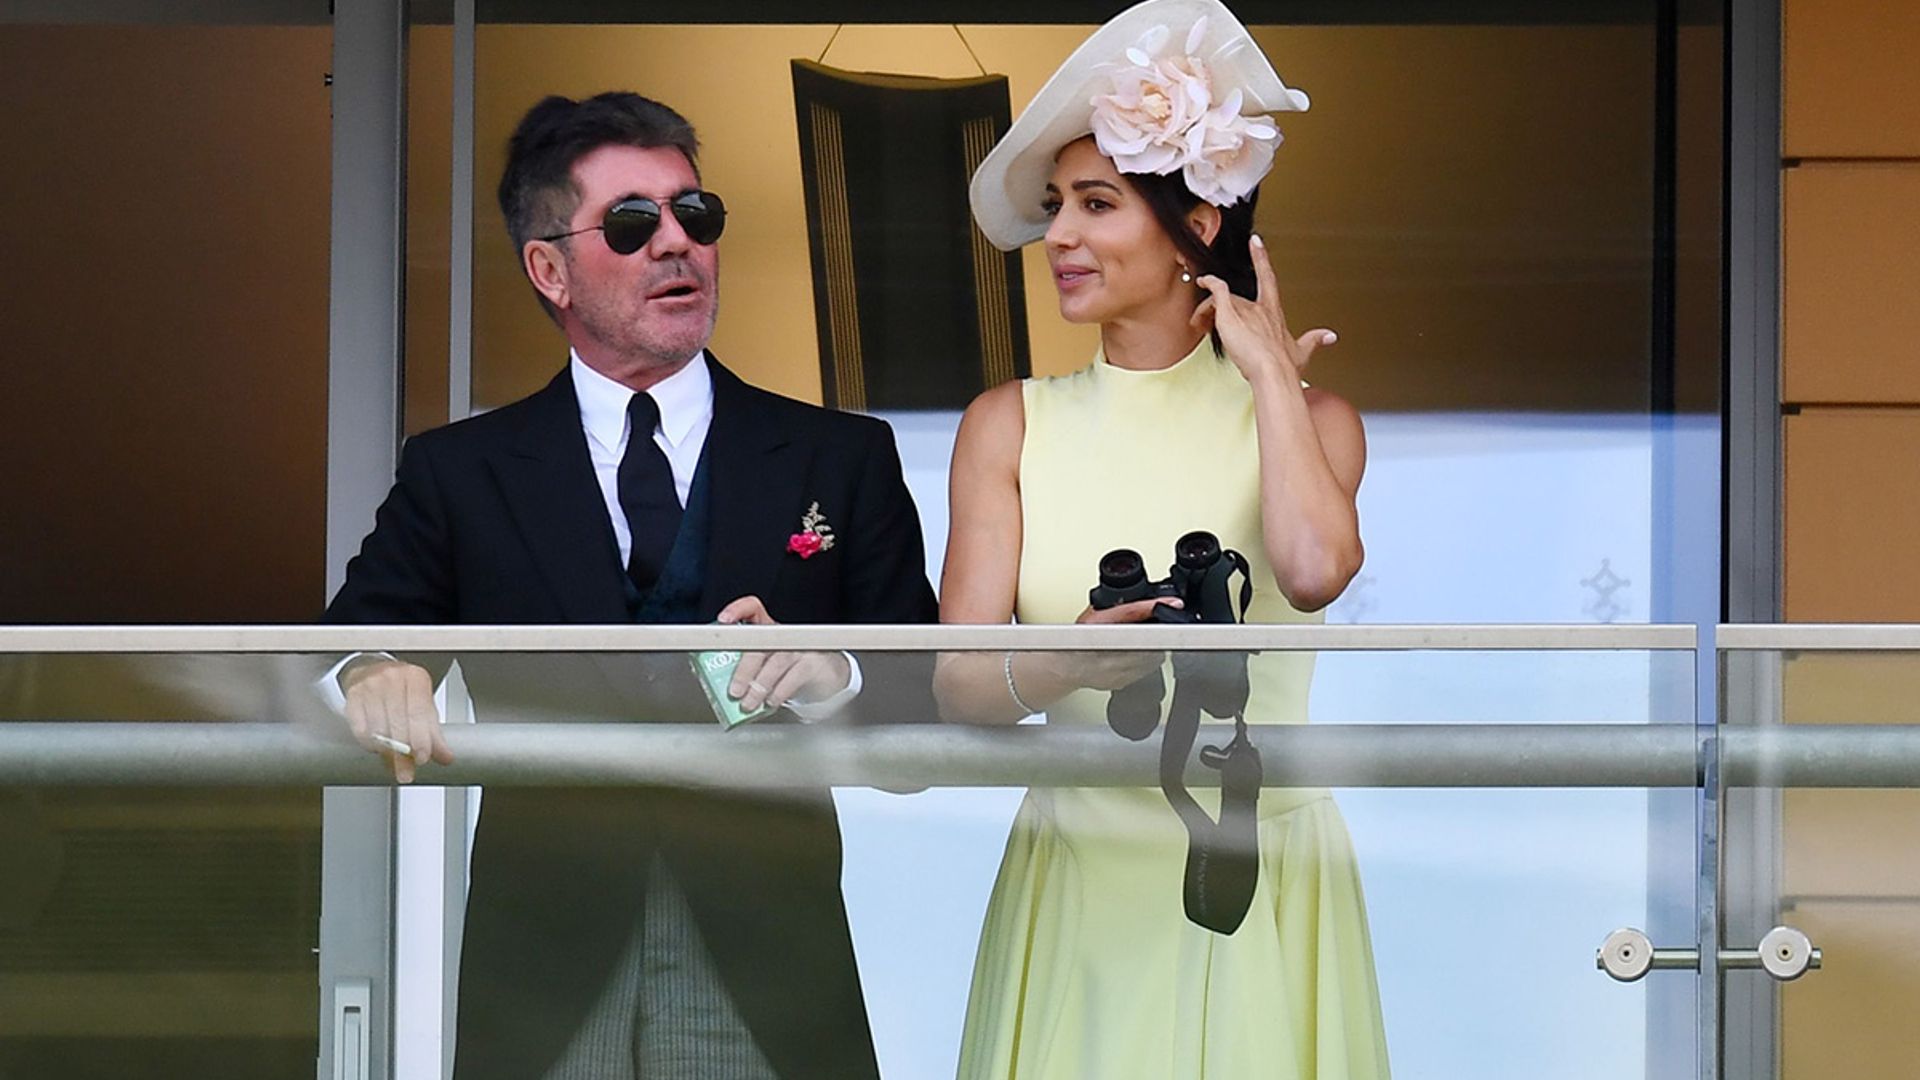 Simon Cowell and Lauren Silverman are couple goals during stylish day out at Royal Ascot